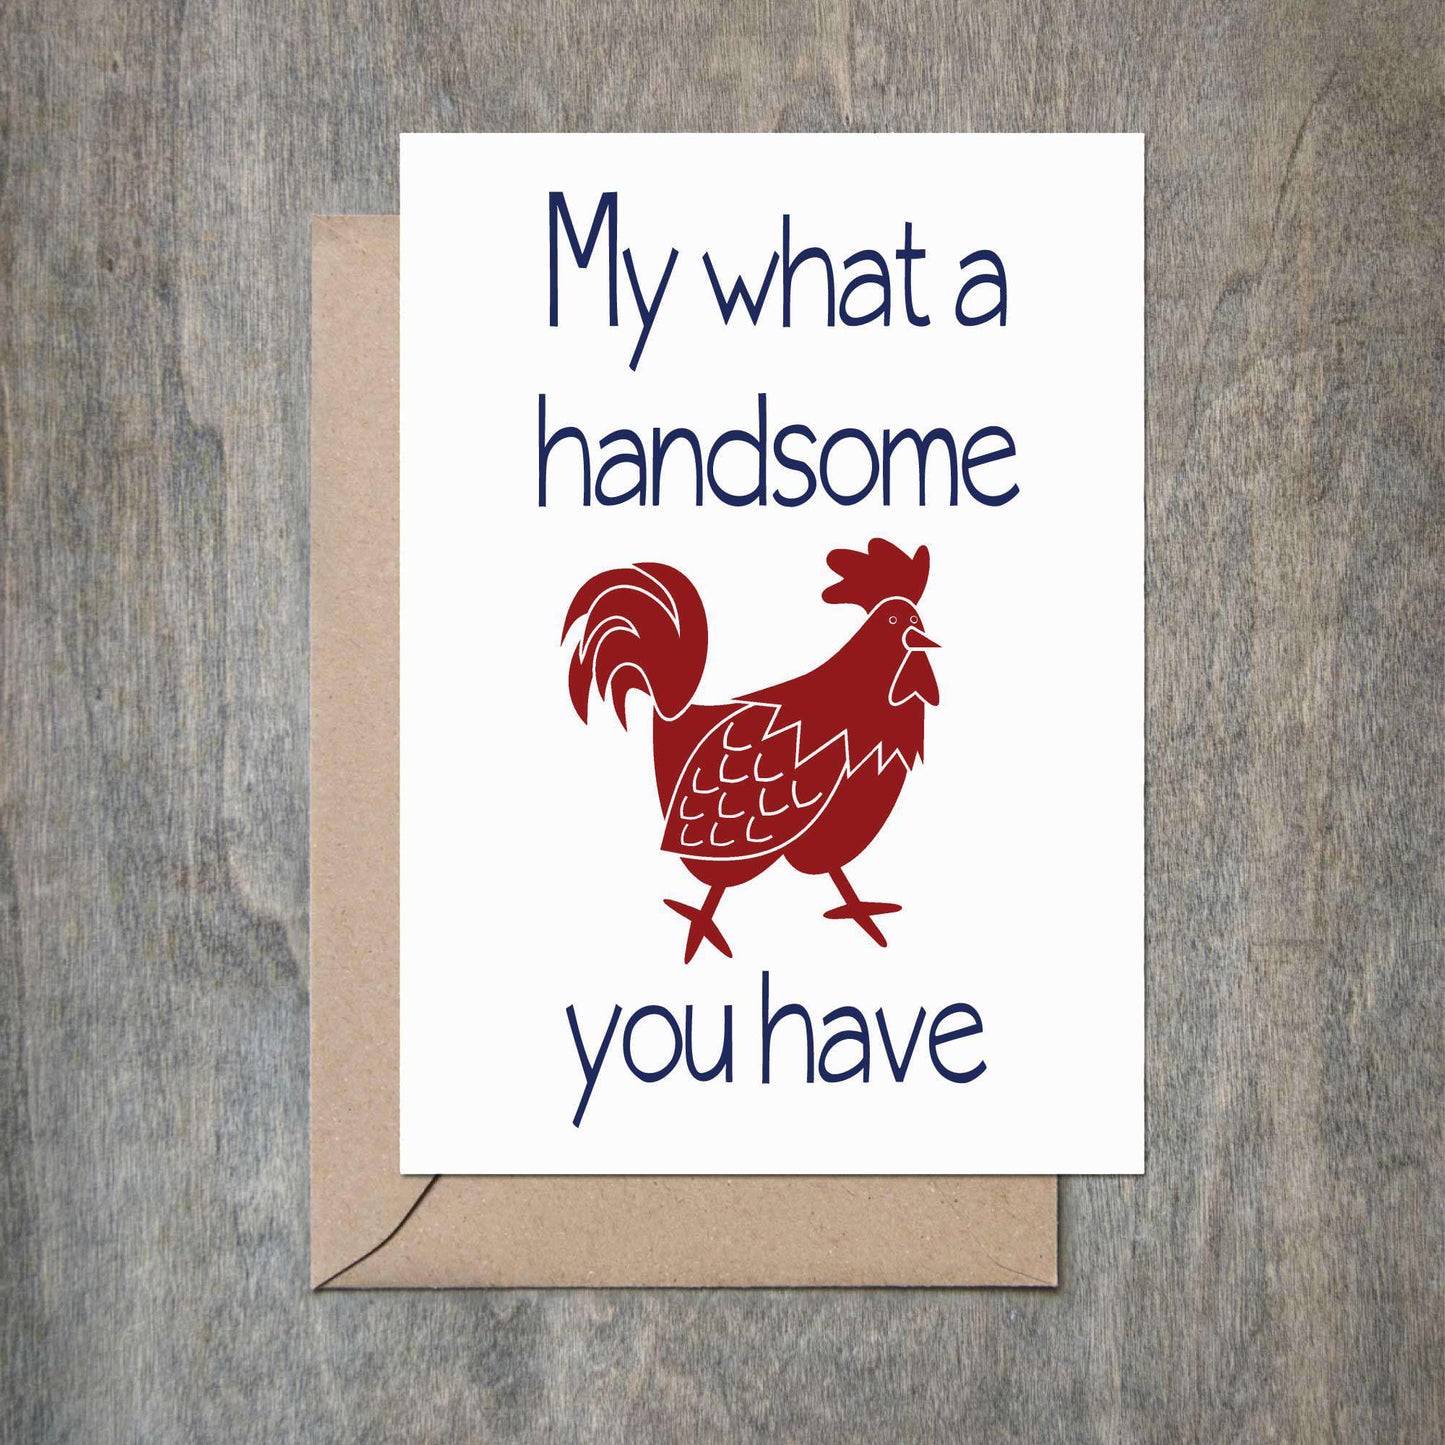 Funny Love Card My What a Handsome 🐓 You Have-Love Cards-Crimson and Clover Studio